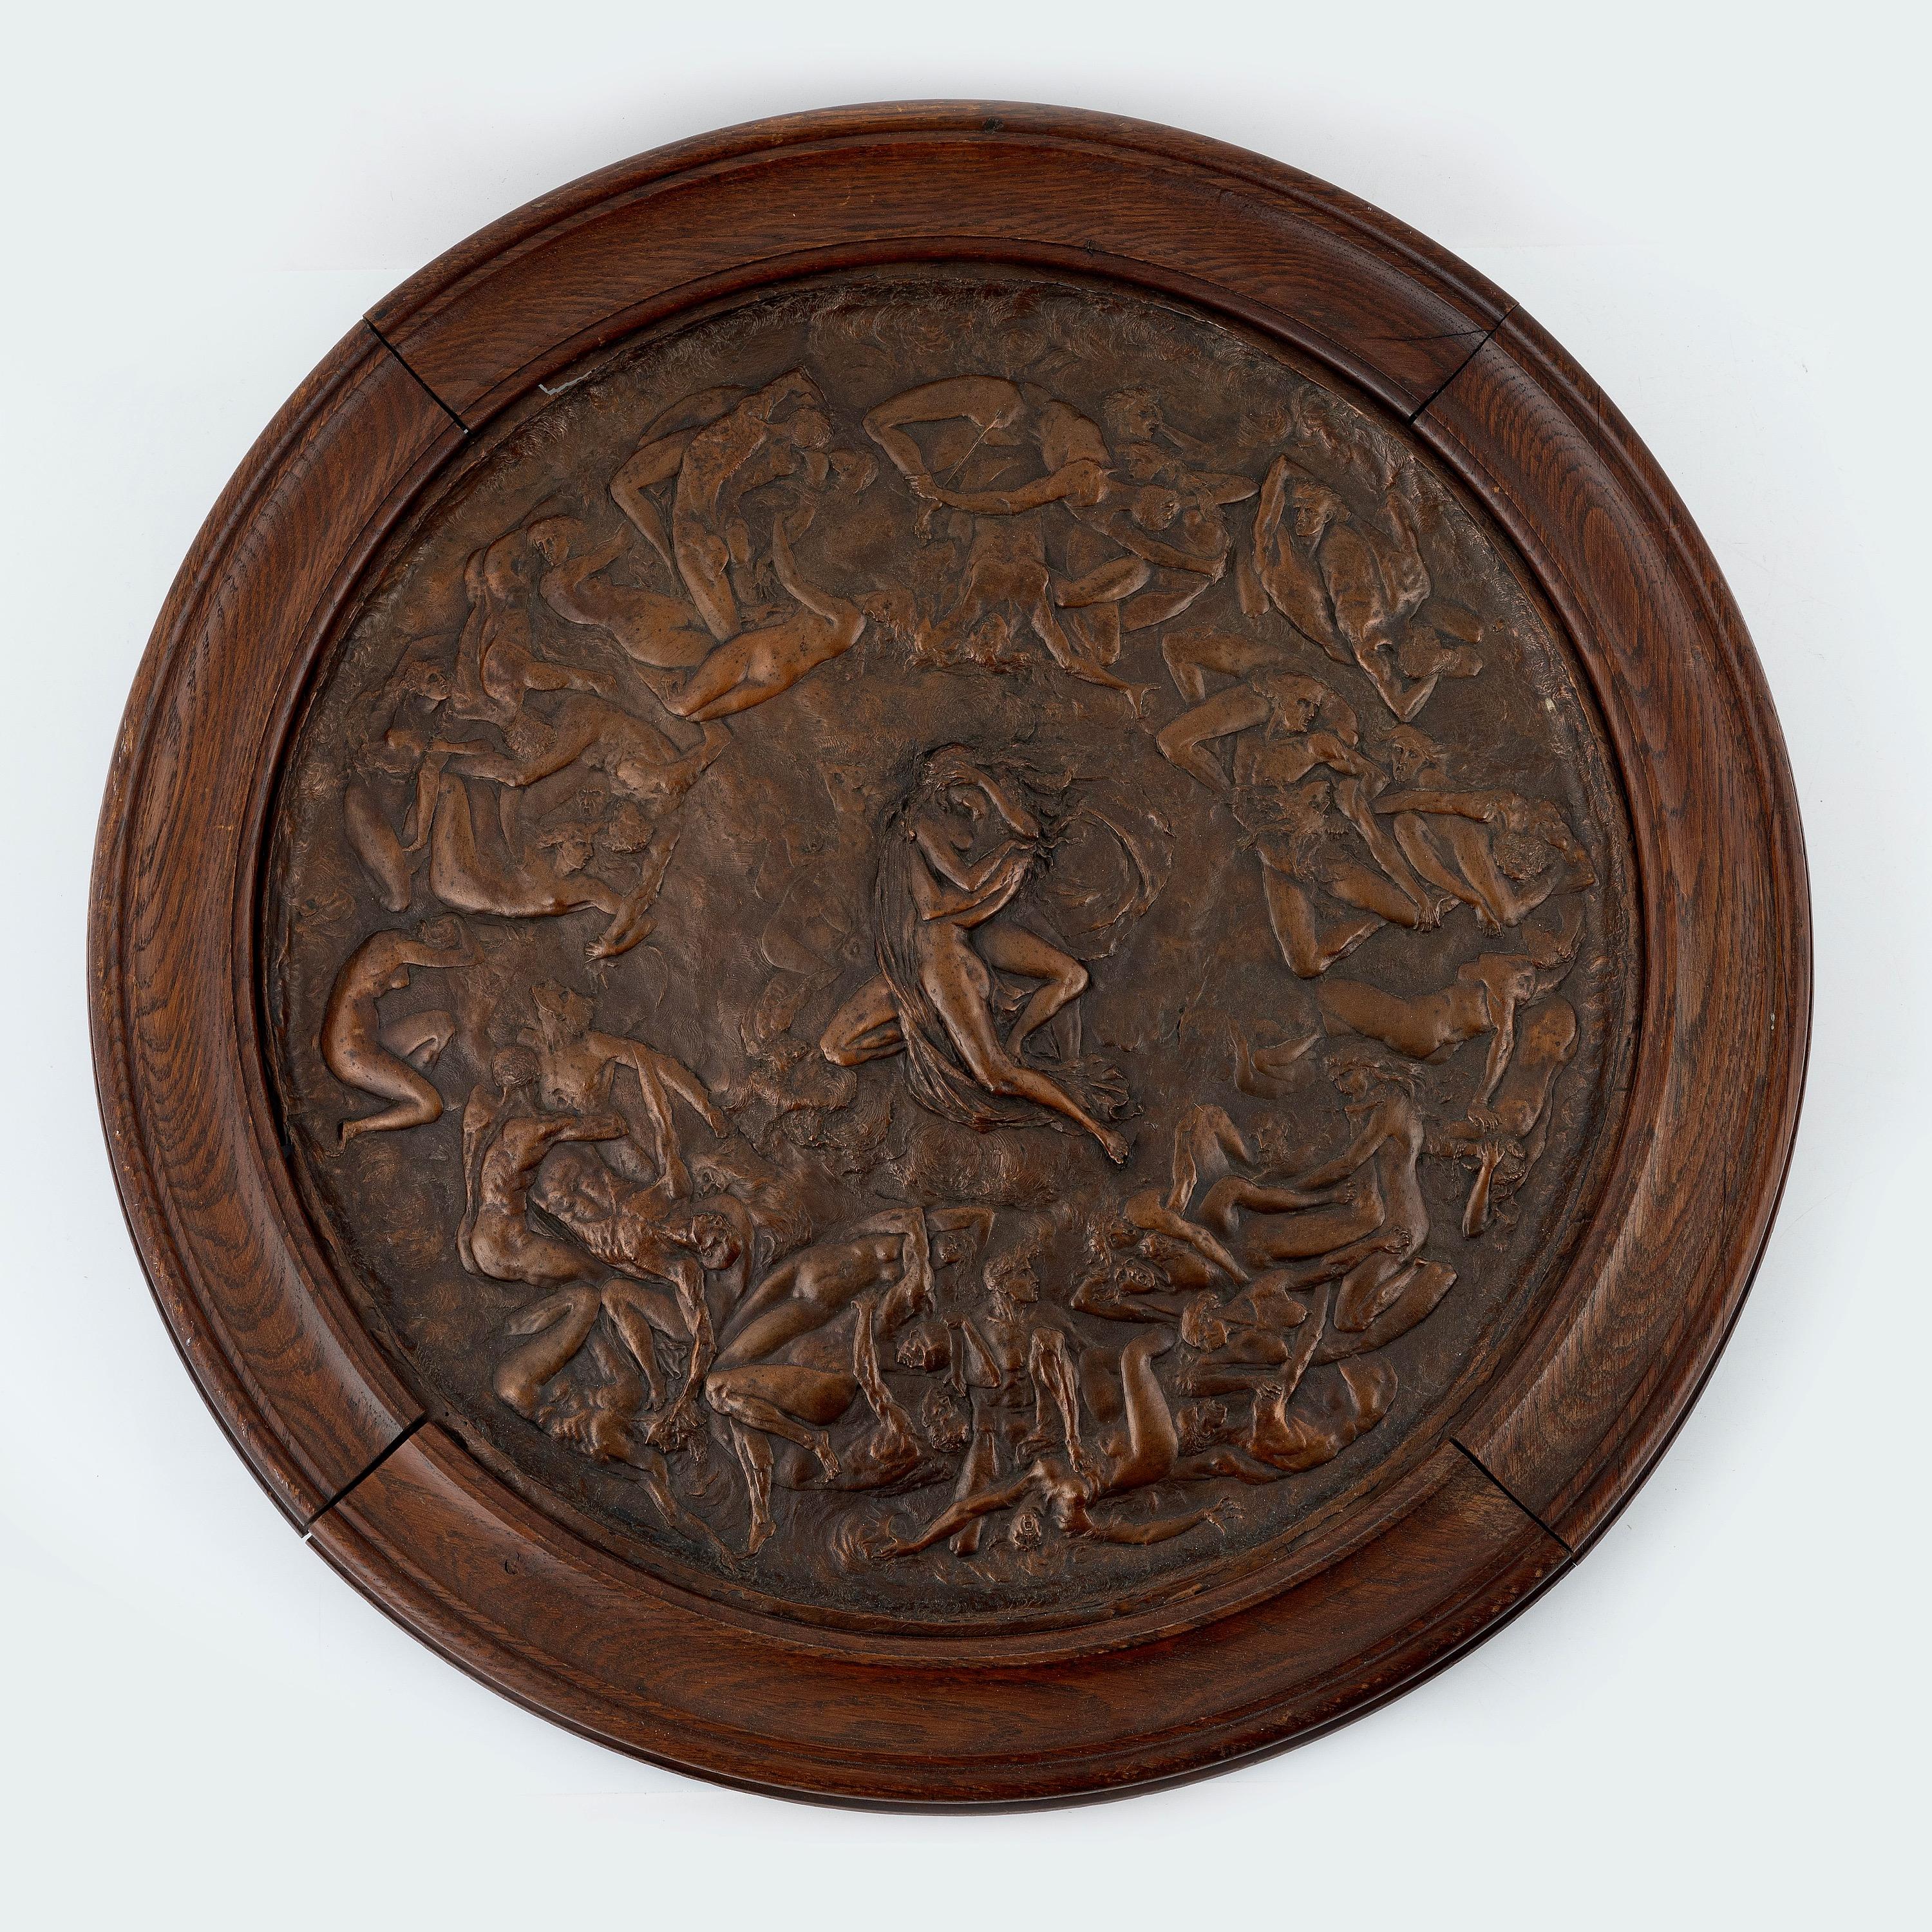 L'Enfer des Luxurieux, The Hell of the Luxurious Relief, 19th Century Bronze.